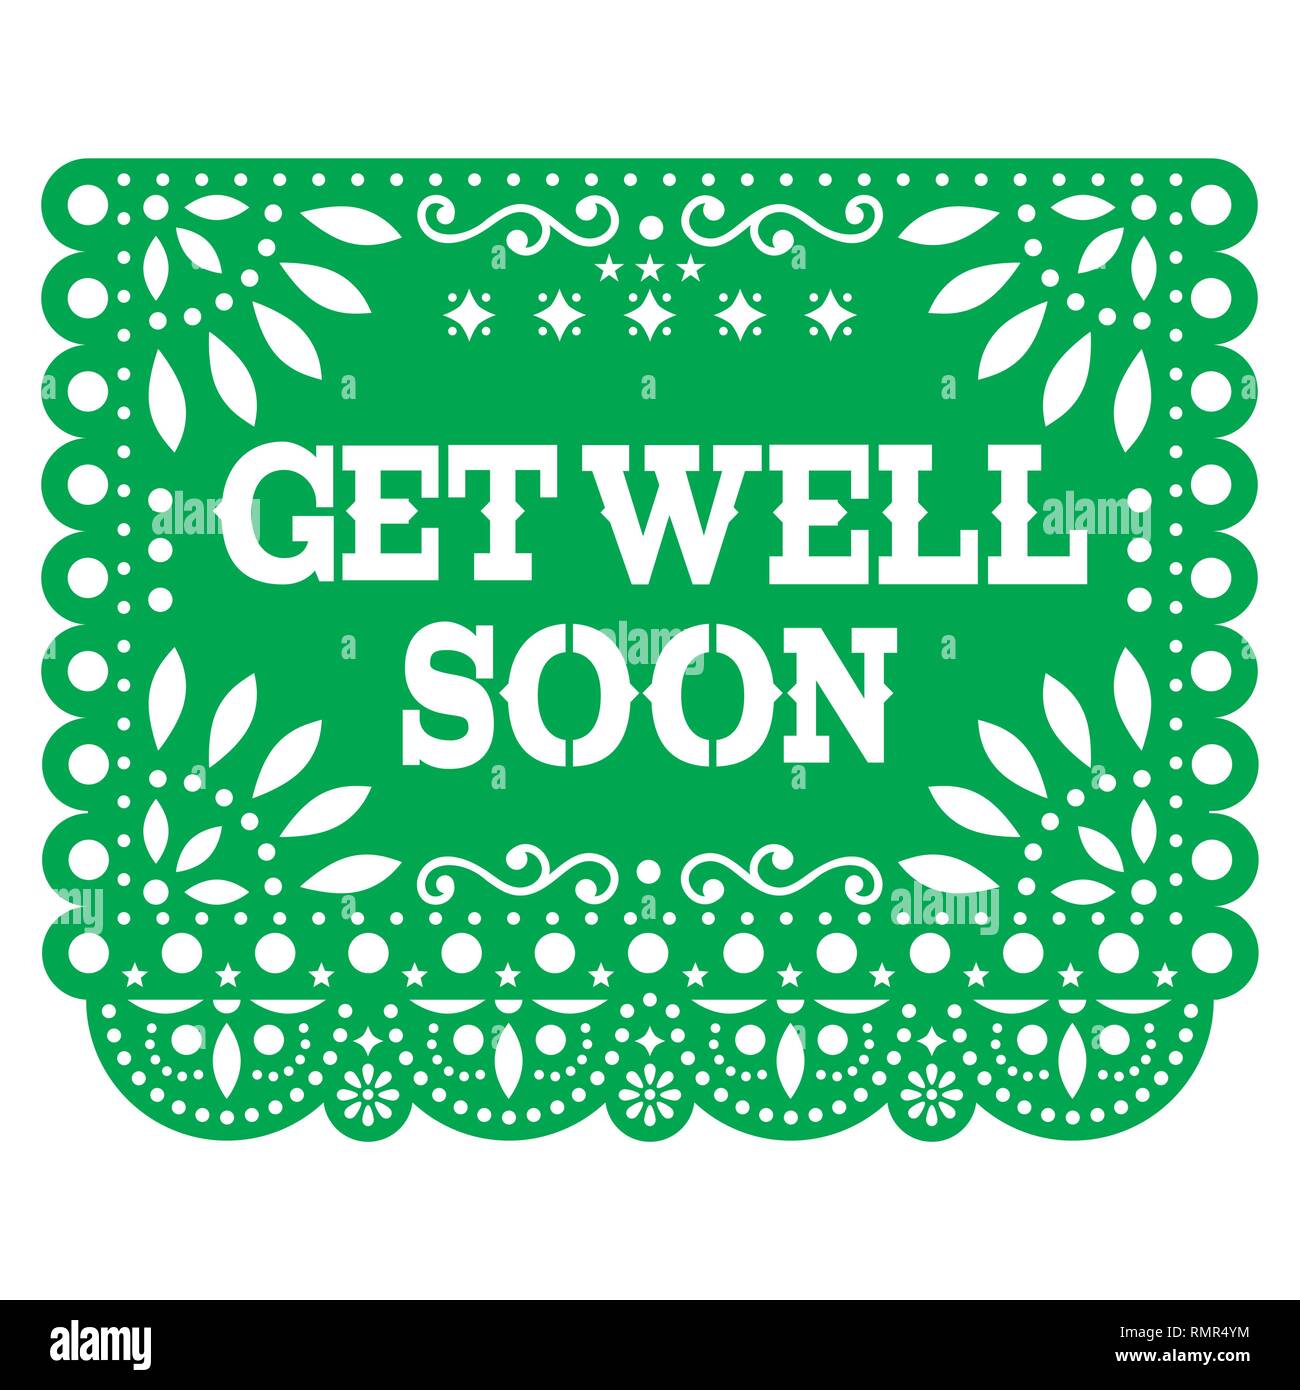 Get well soon Papel Picado greeting card or postcard - Mexican green vector design styled as paper cutout decorations Stock Vector